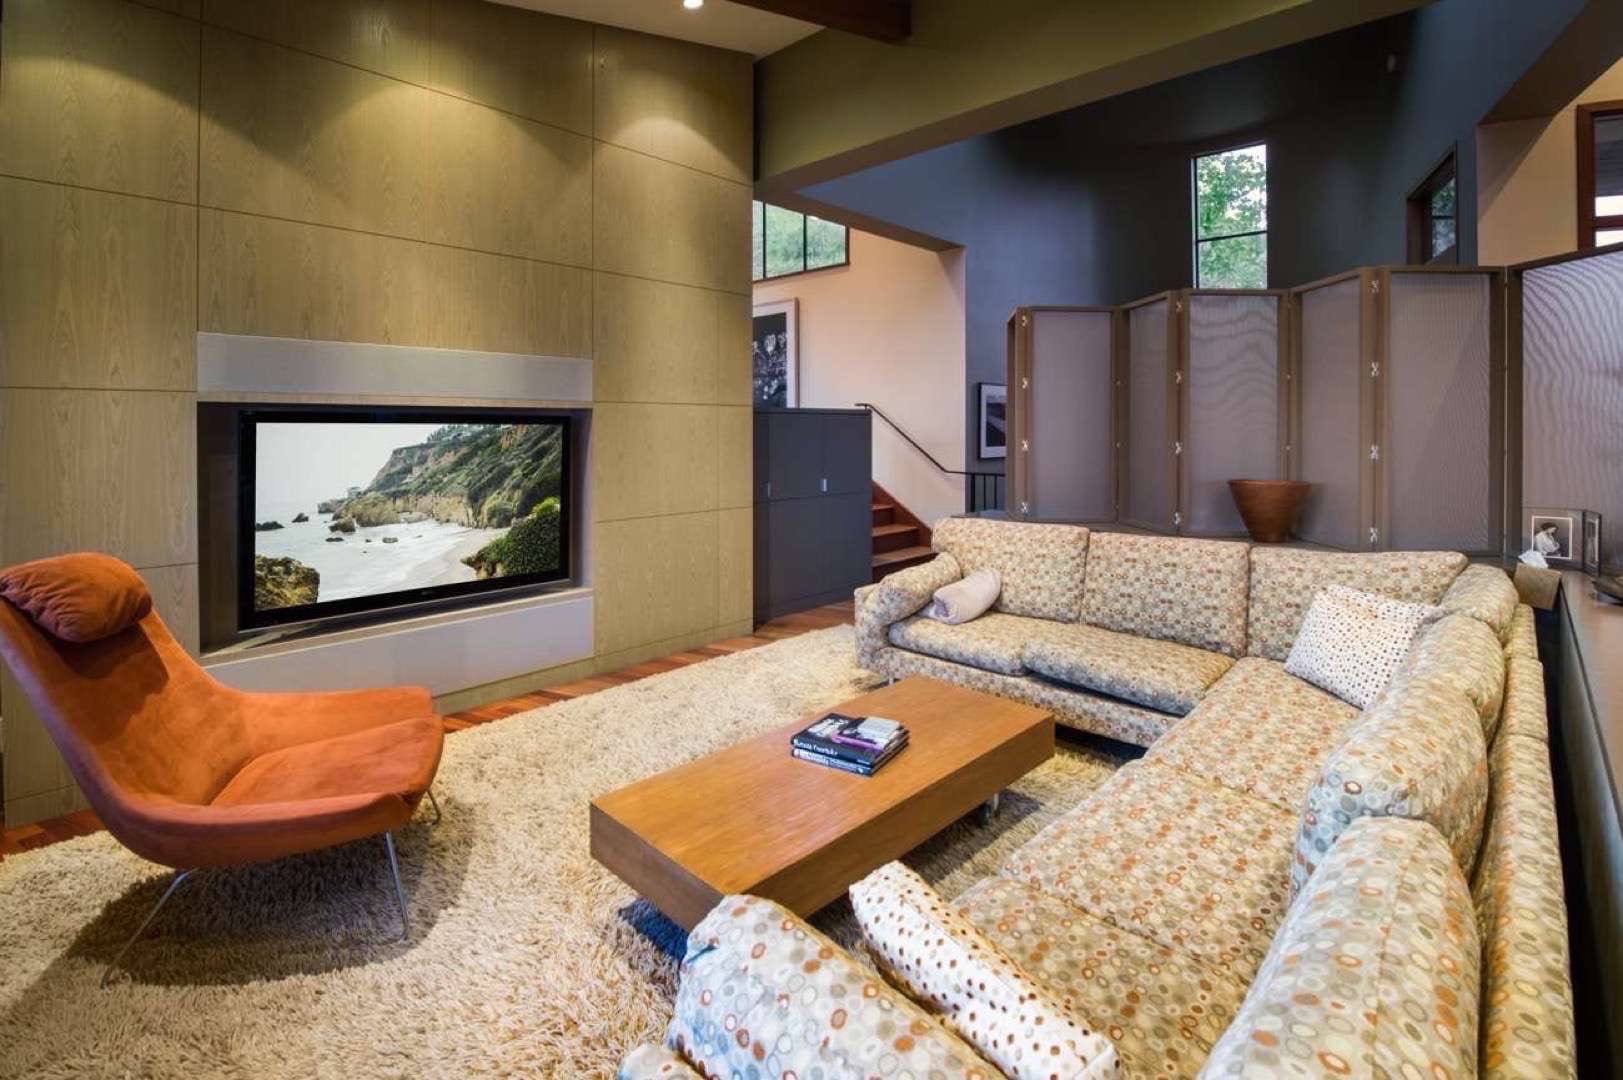 Truly Great Homes View of a living room area with a large screen TV and wrap around couch. There is also a privacy screen in the background.